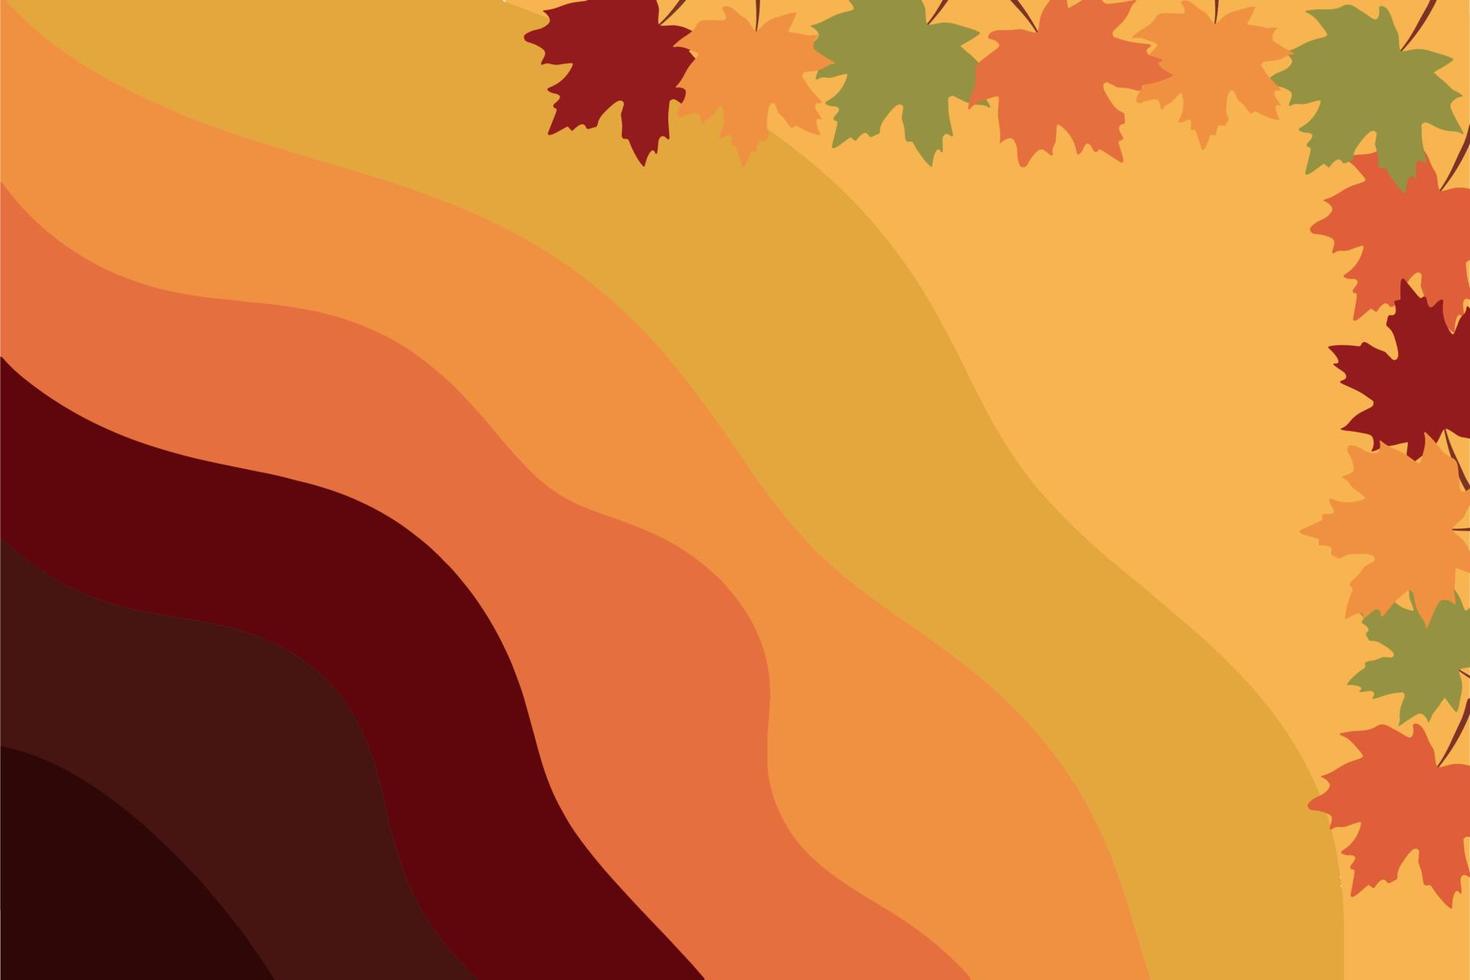 Abstract floral illustration. Background with falling autumn leaves vector